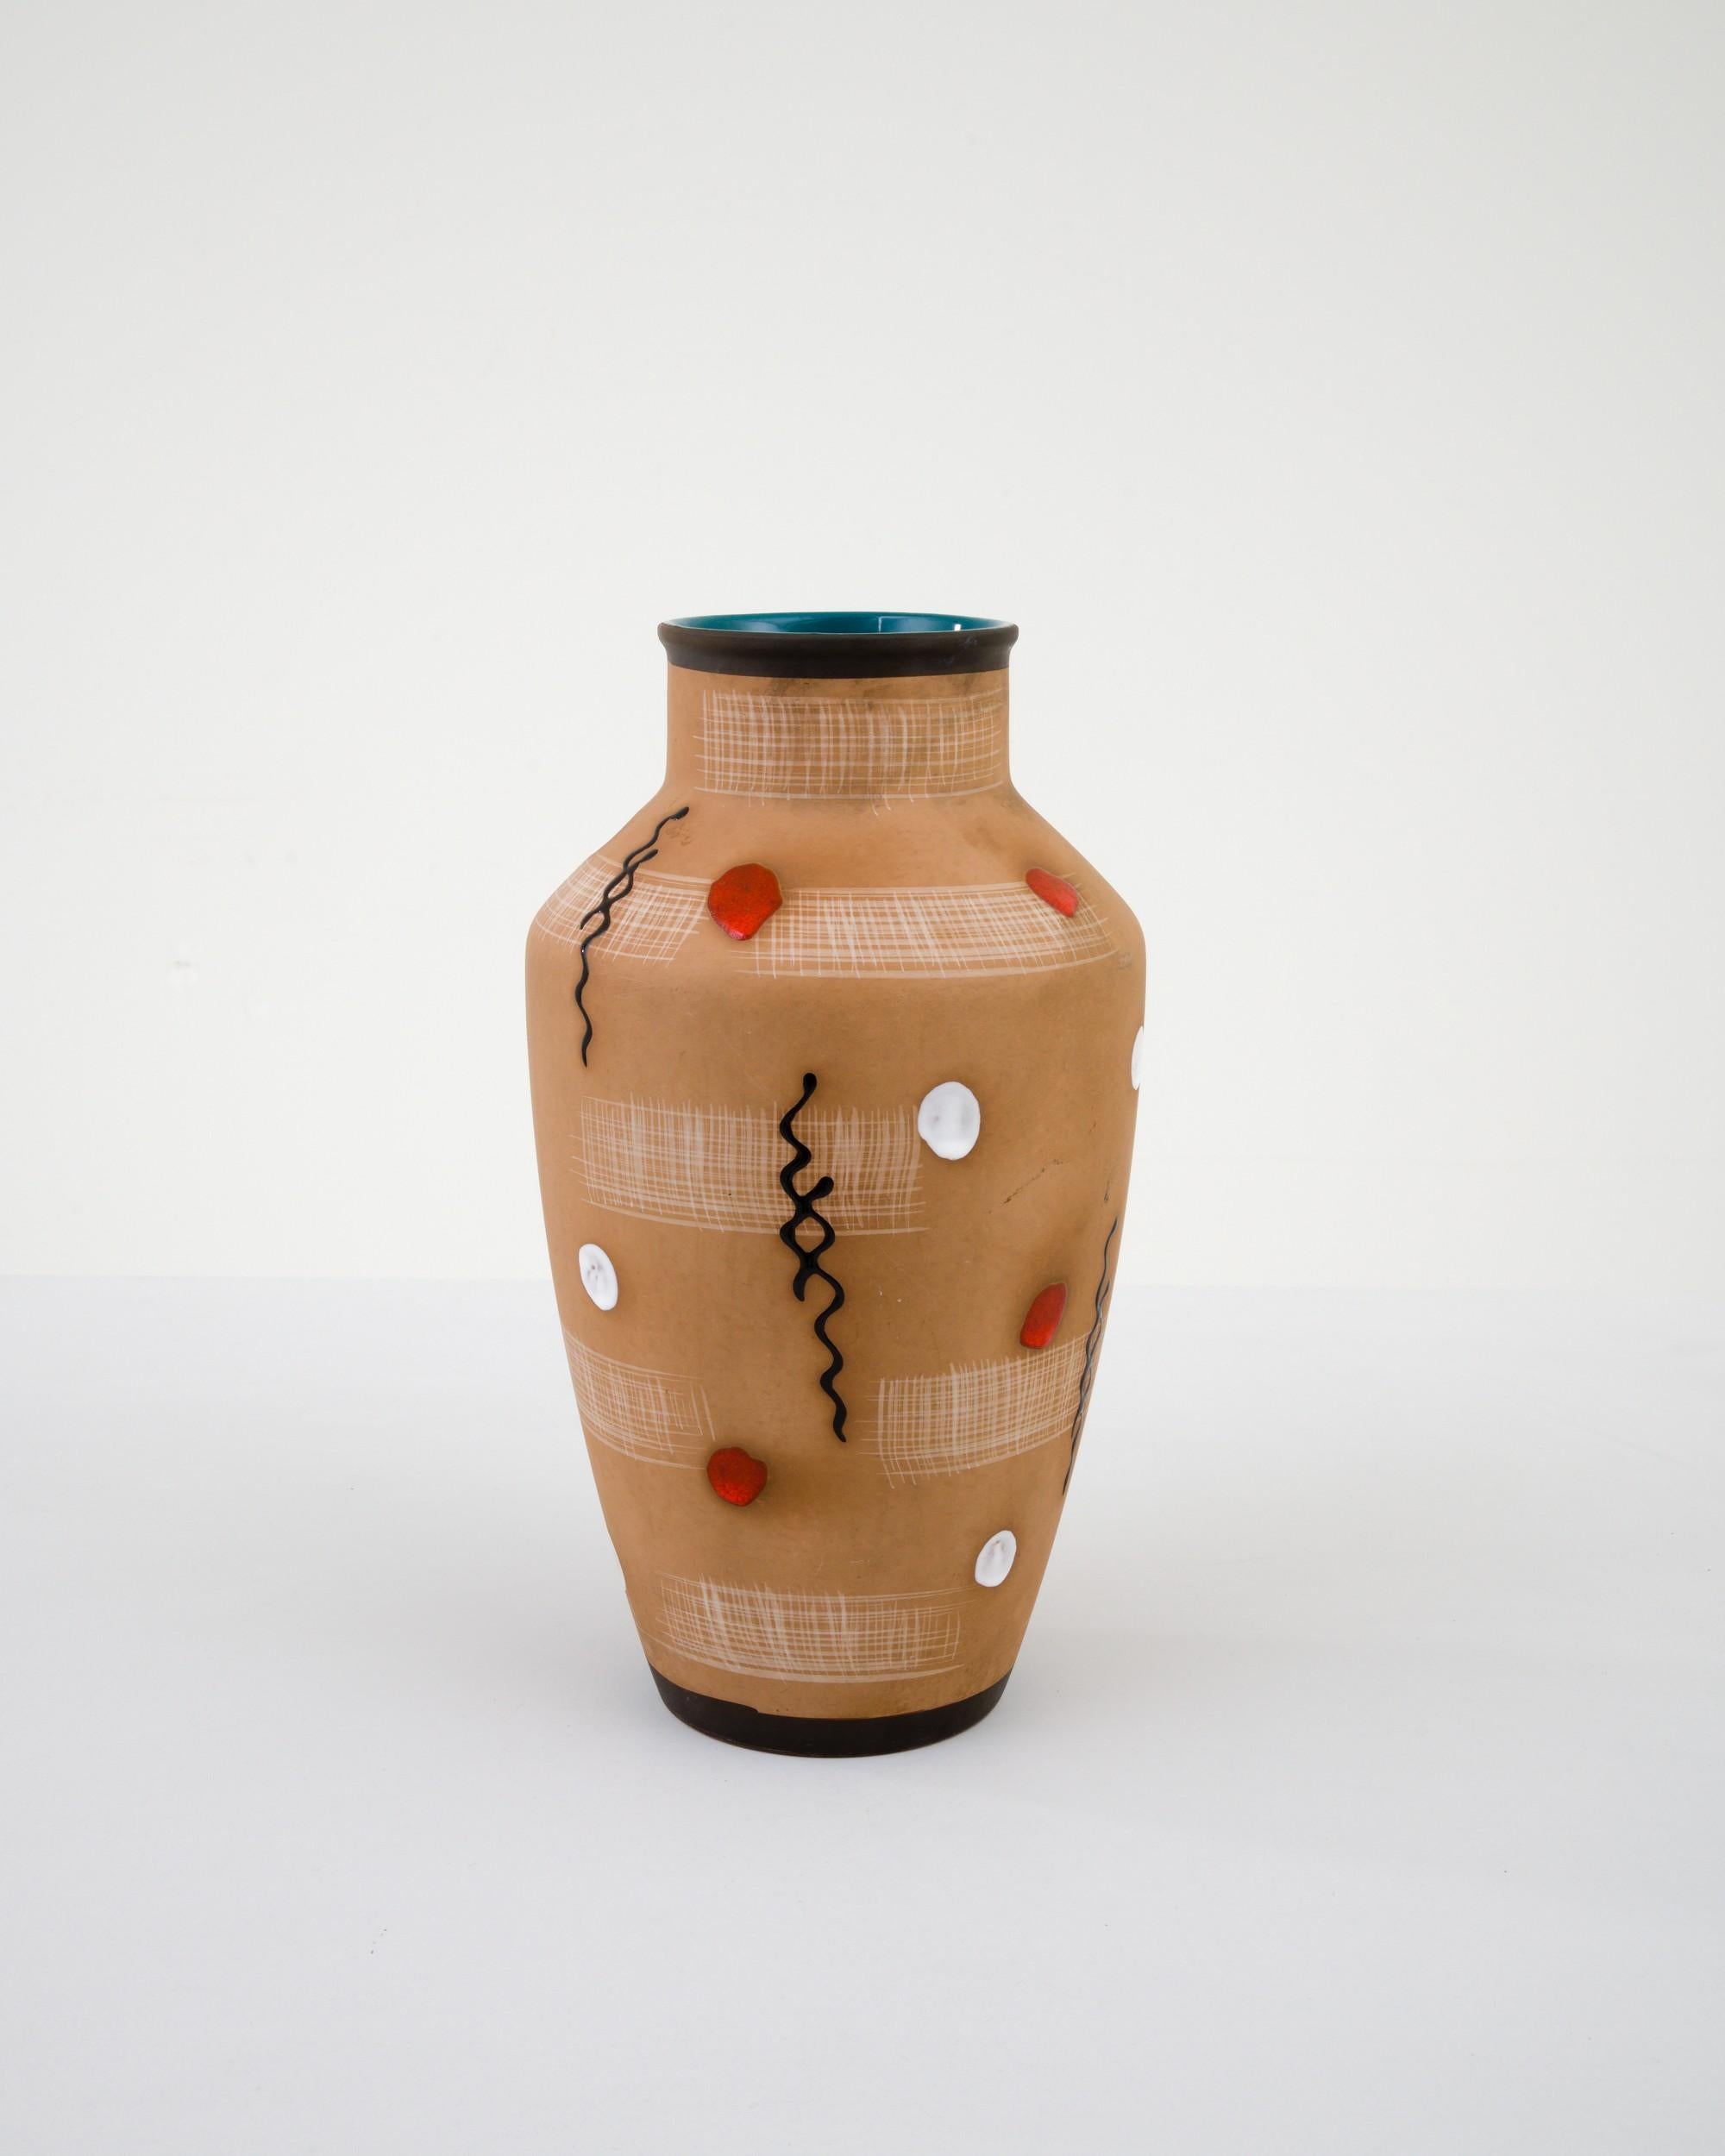 A ceramic vase from mid-20th century Germany. Neither large nor small, this studio made pot reflects the hand-held, and the handmade; the tactility of process and the artist's vision– realized on the potter’s wheel. Abstract geometry adorns a